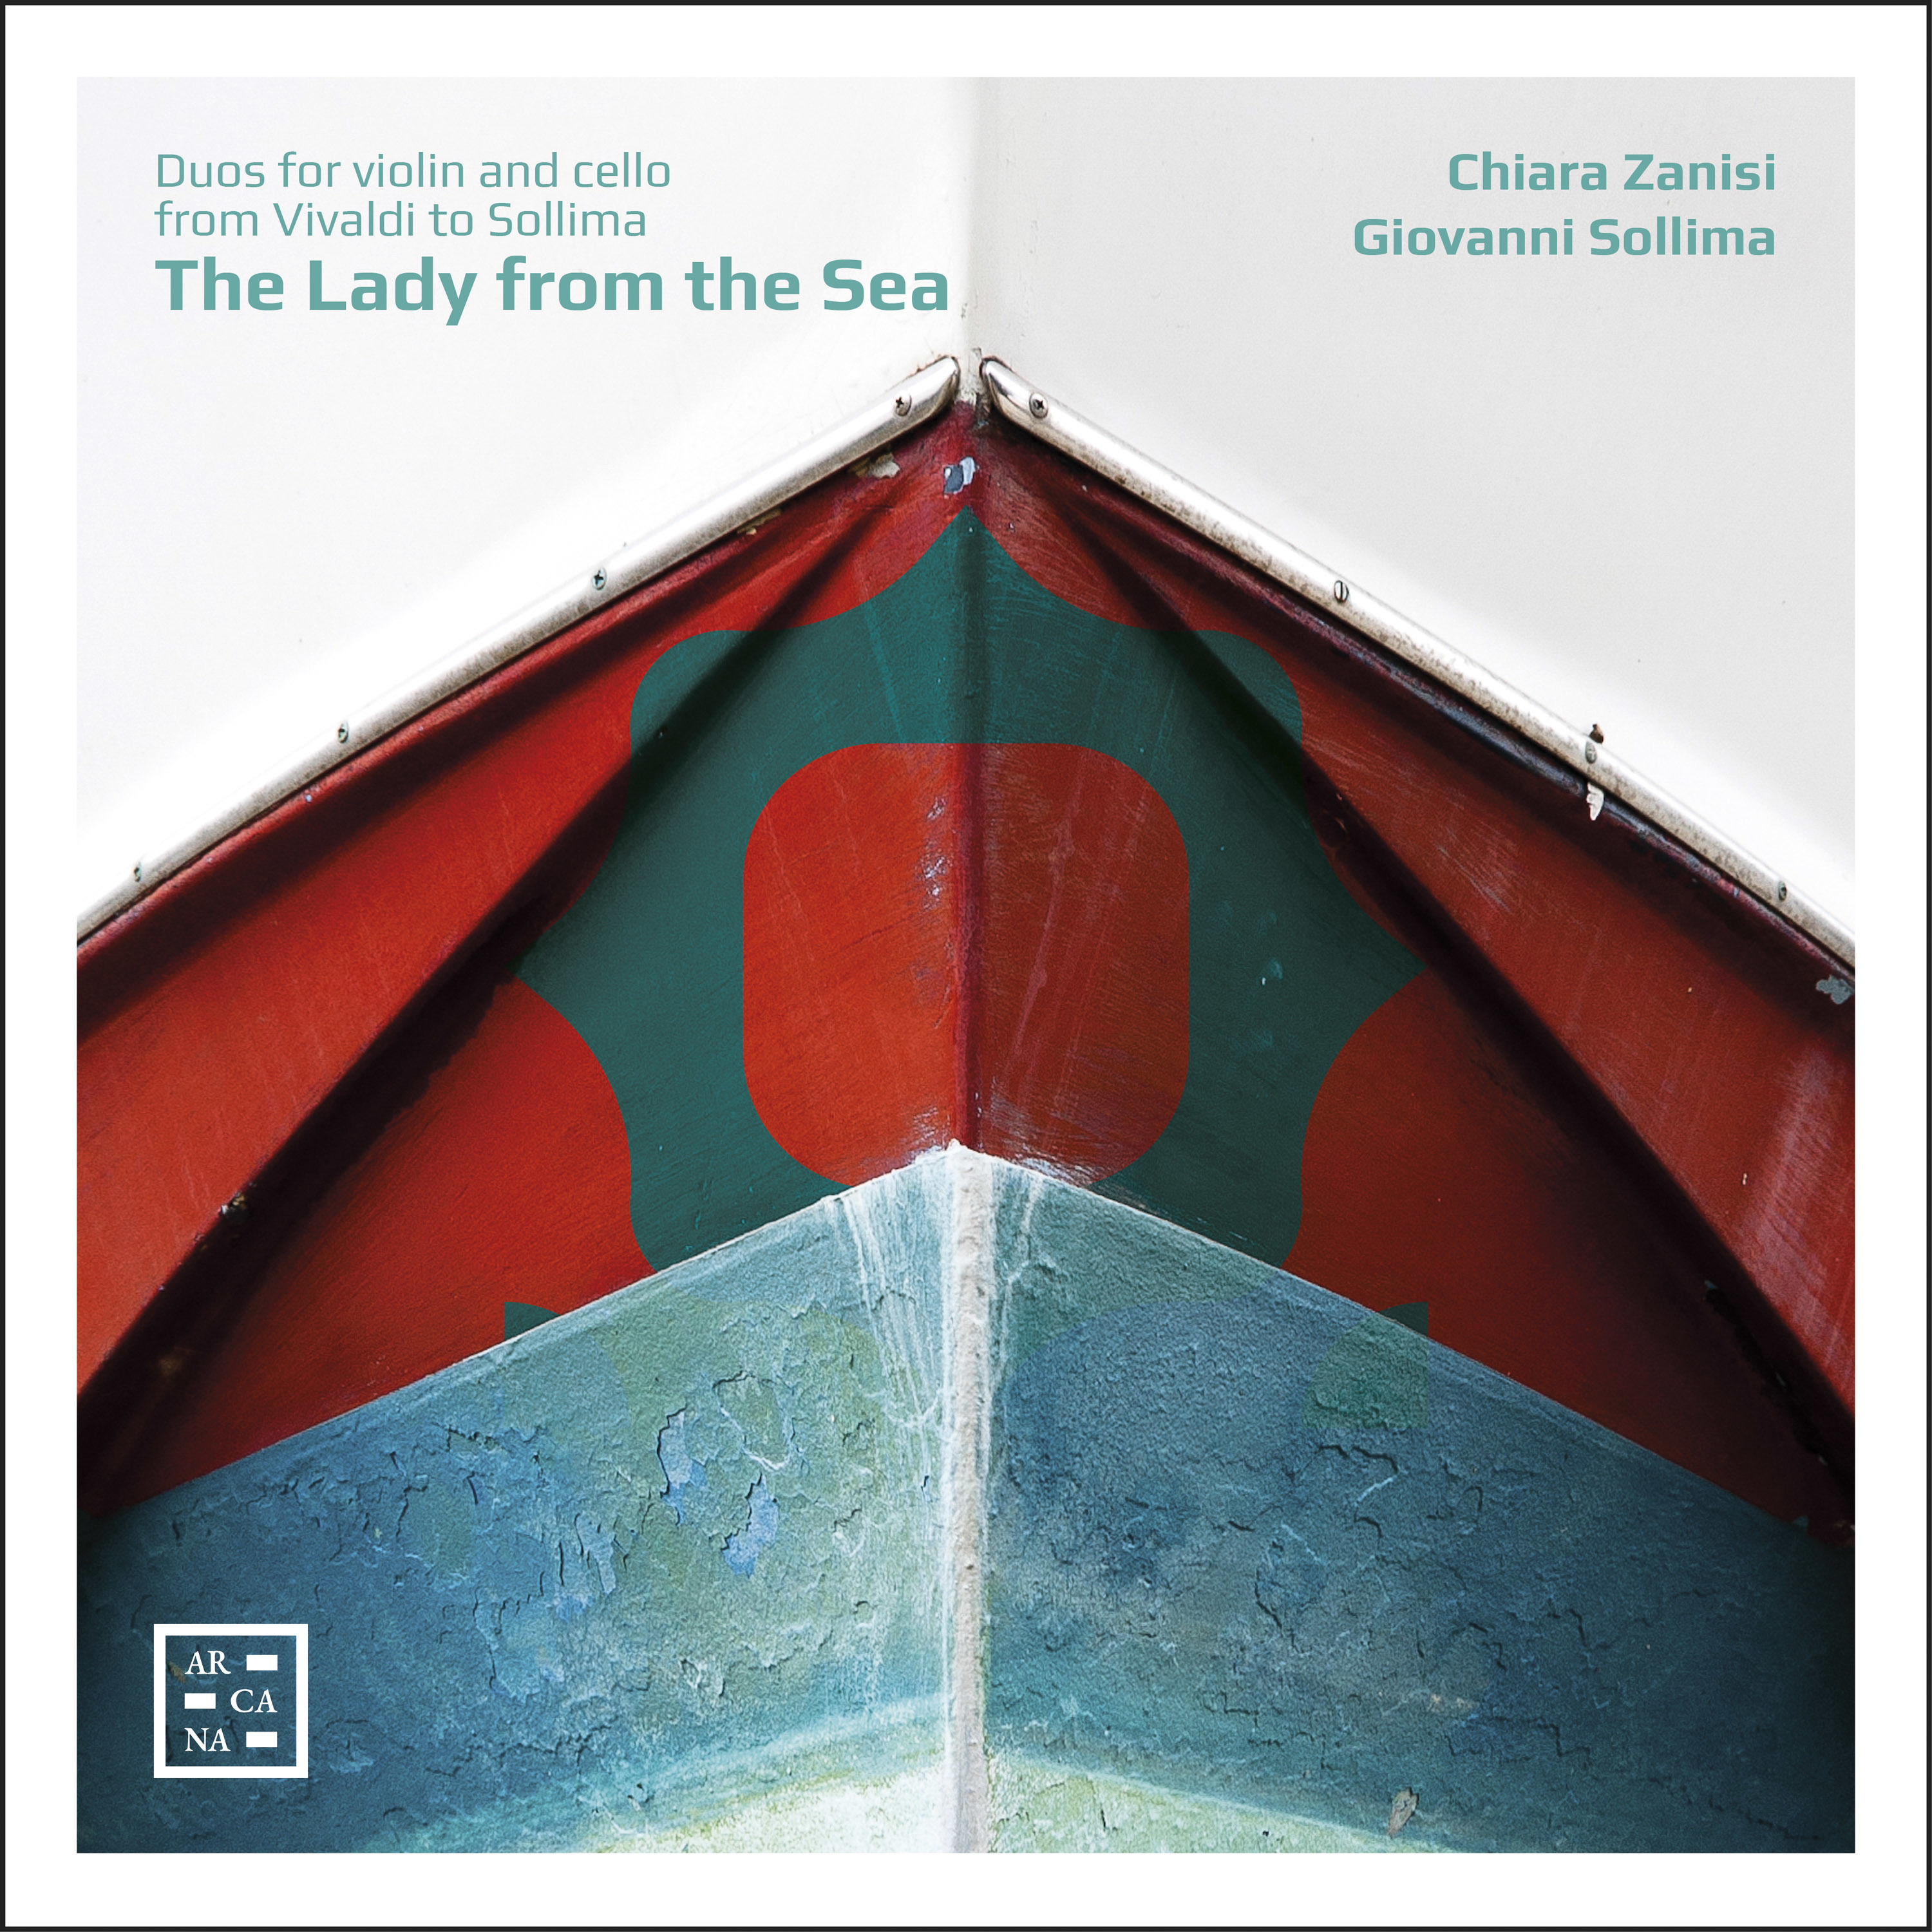 Chiara Zanisi & Giovanni Sollima – The Lady from the Sea: Duos for Violin and Cello from Vivaldi to Sollima (2020) [FLAC 24bit/96kHz]